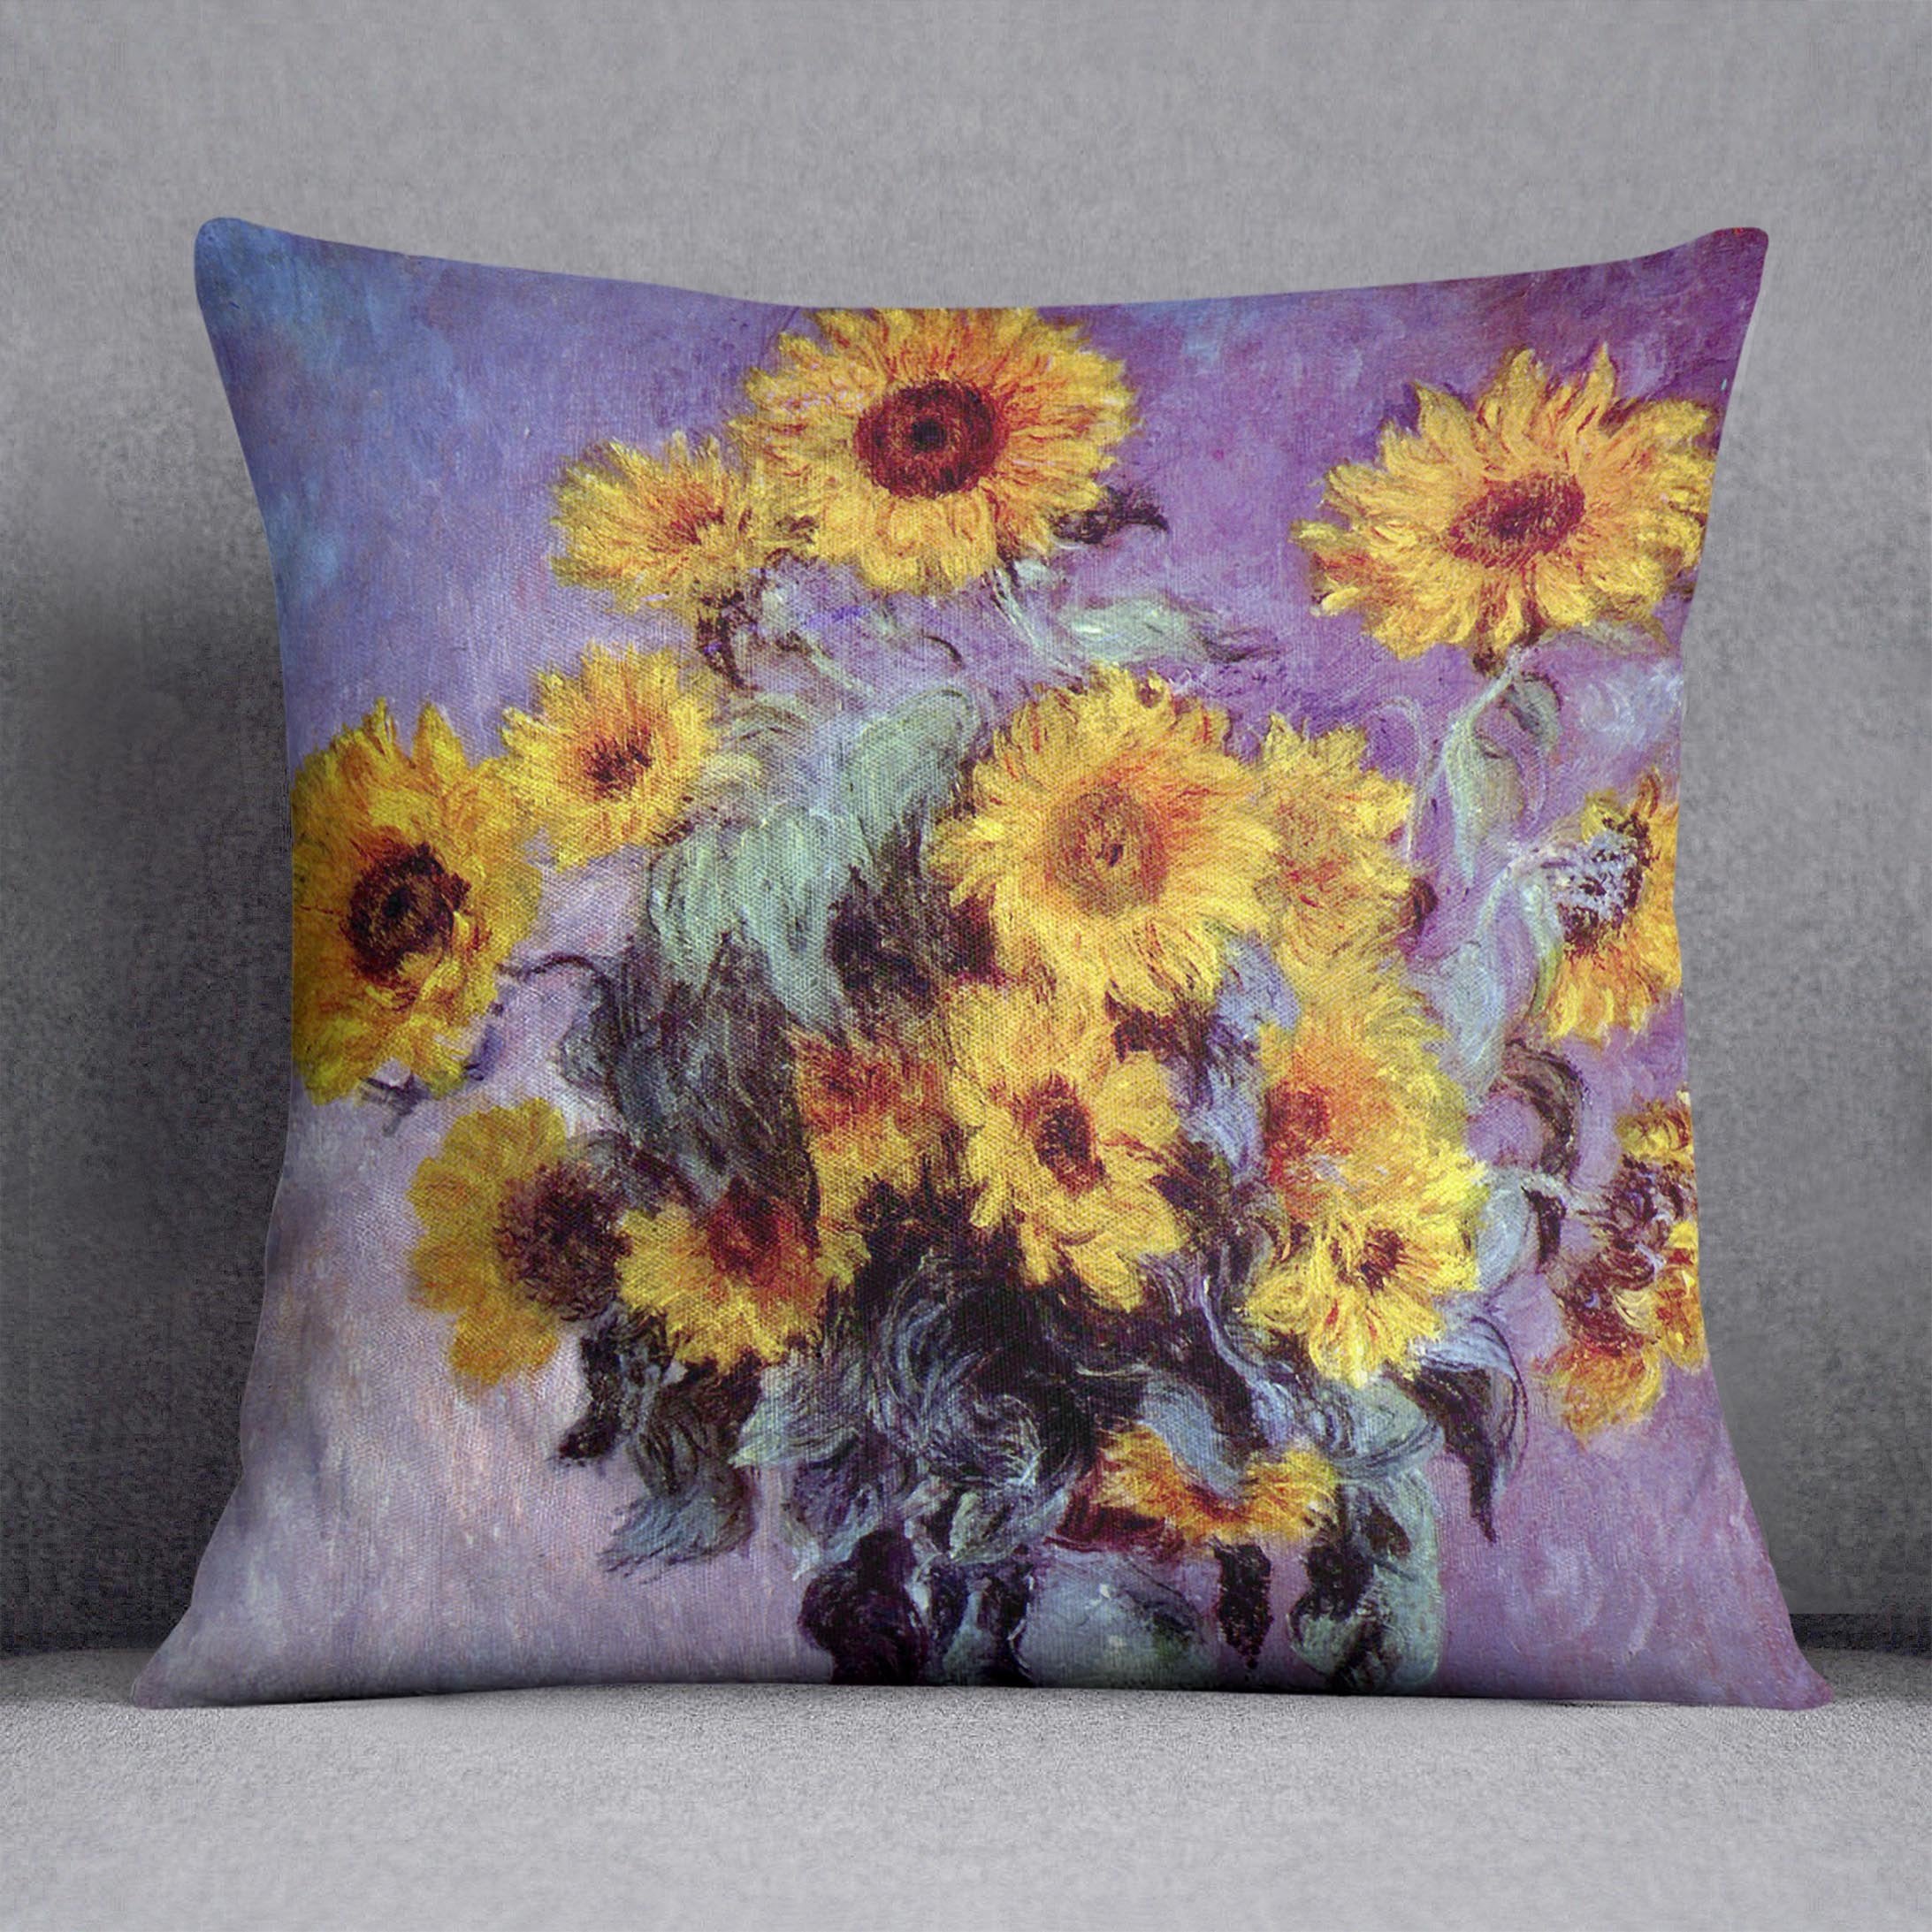 Still Life with Sunflowers by Monet Throw Pillow